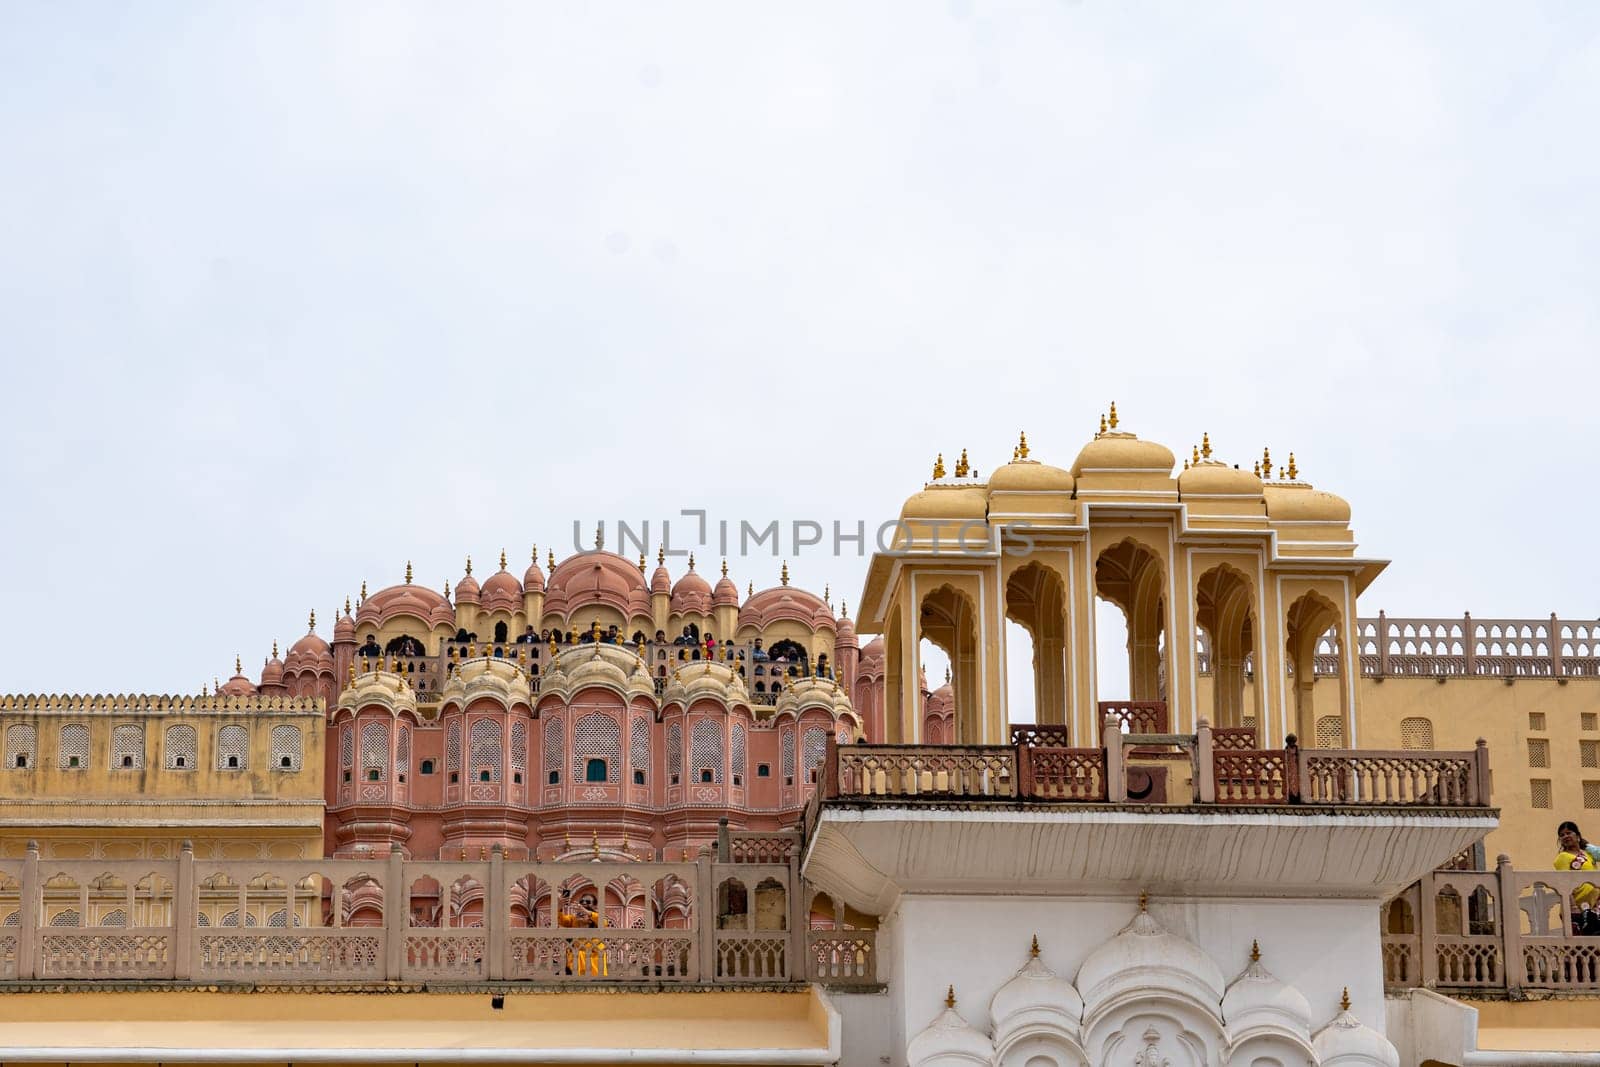 Hawa Mahal Palace in Jaipur, India by oliverfoerstner